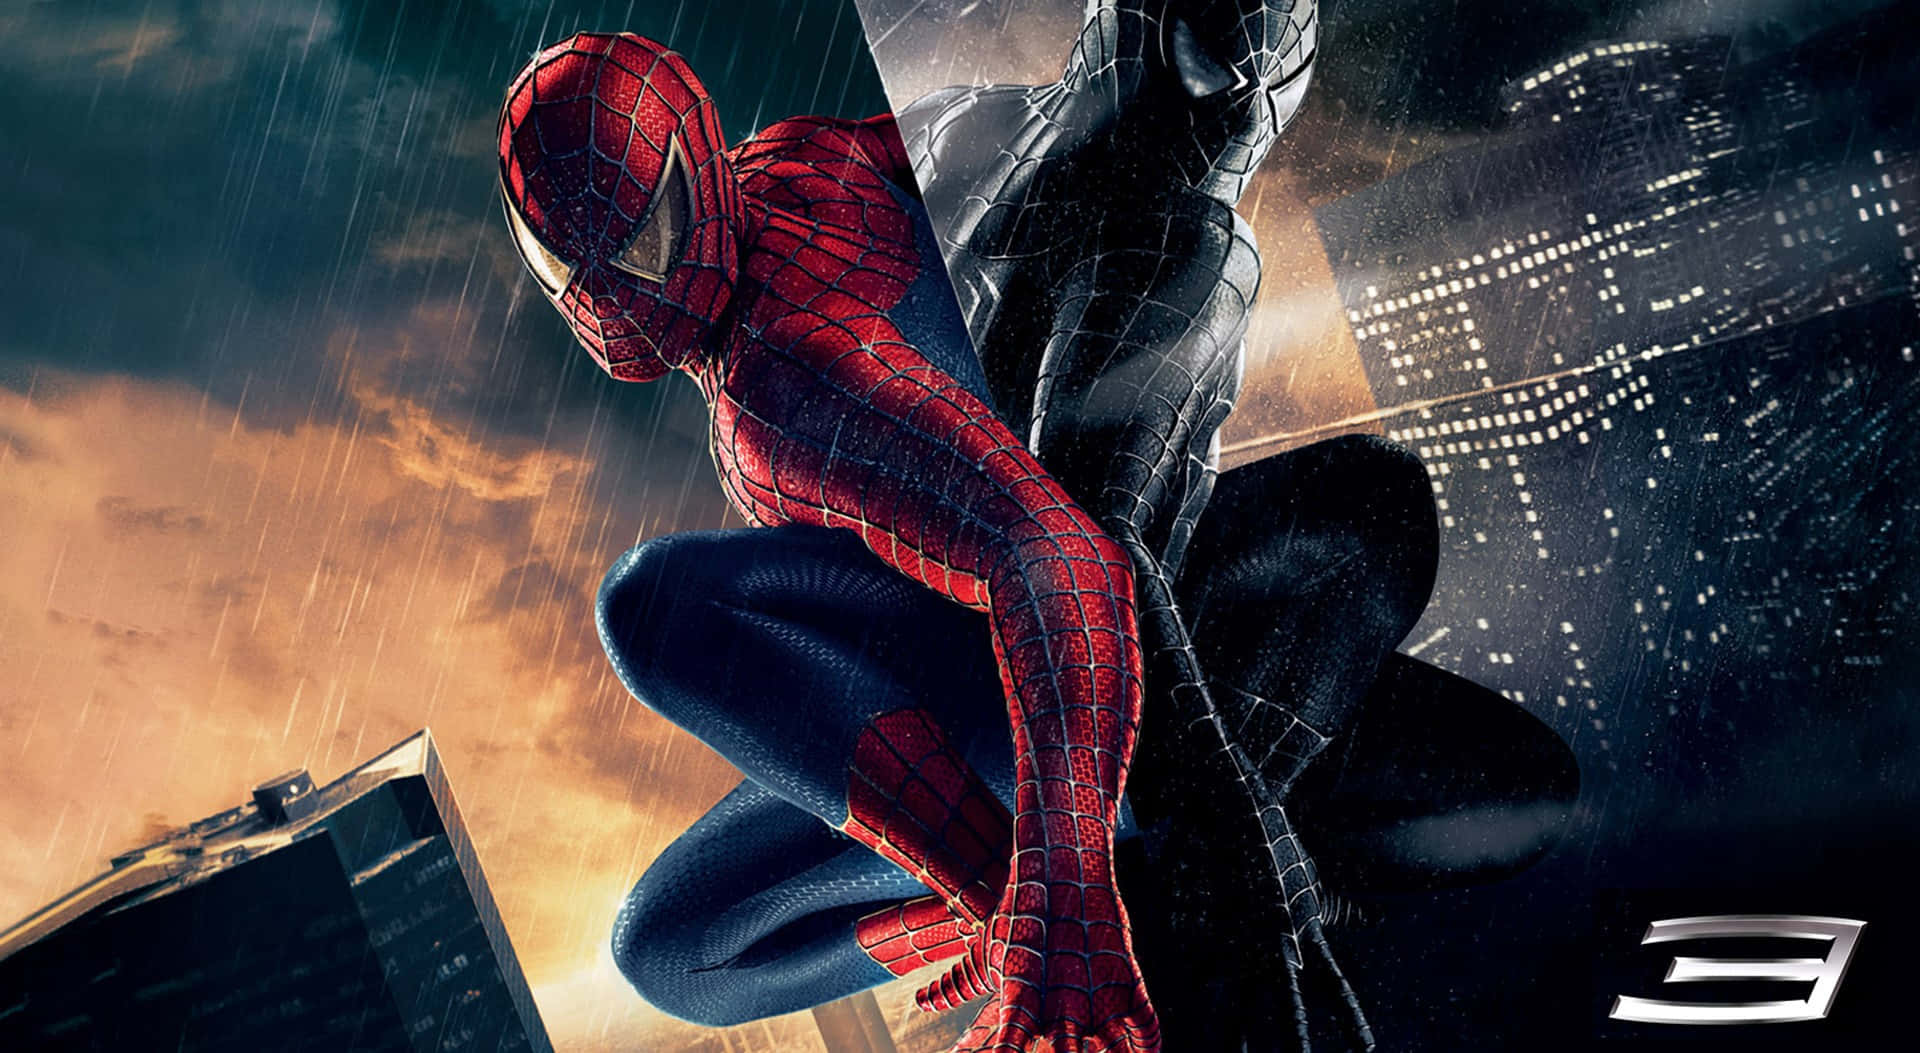 Spider-Man leaps into action in Spider-Man 3 Wallpaper